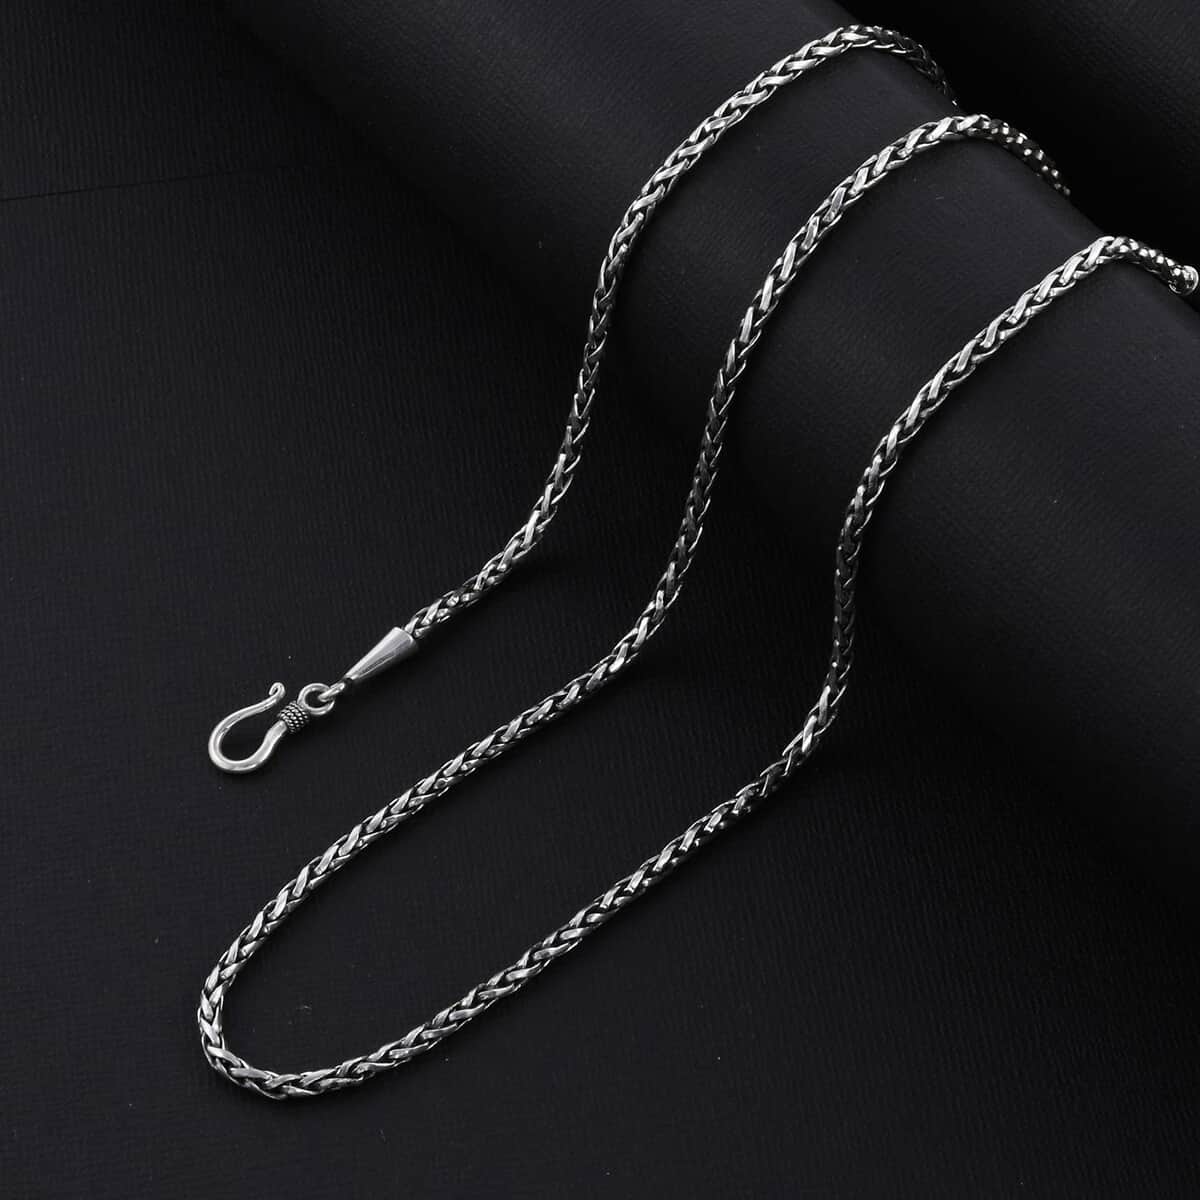 Bali Legacy Padian Chain Necklace, Silver Padian Necklace, Sterling Silver Chain Necklace, 22 Inch Necklace 19.9 Grams image number 1